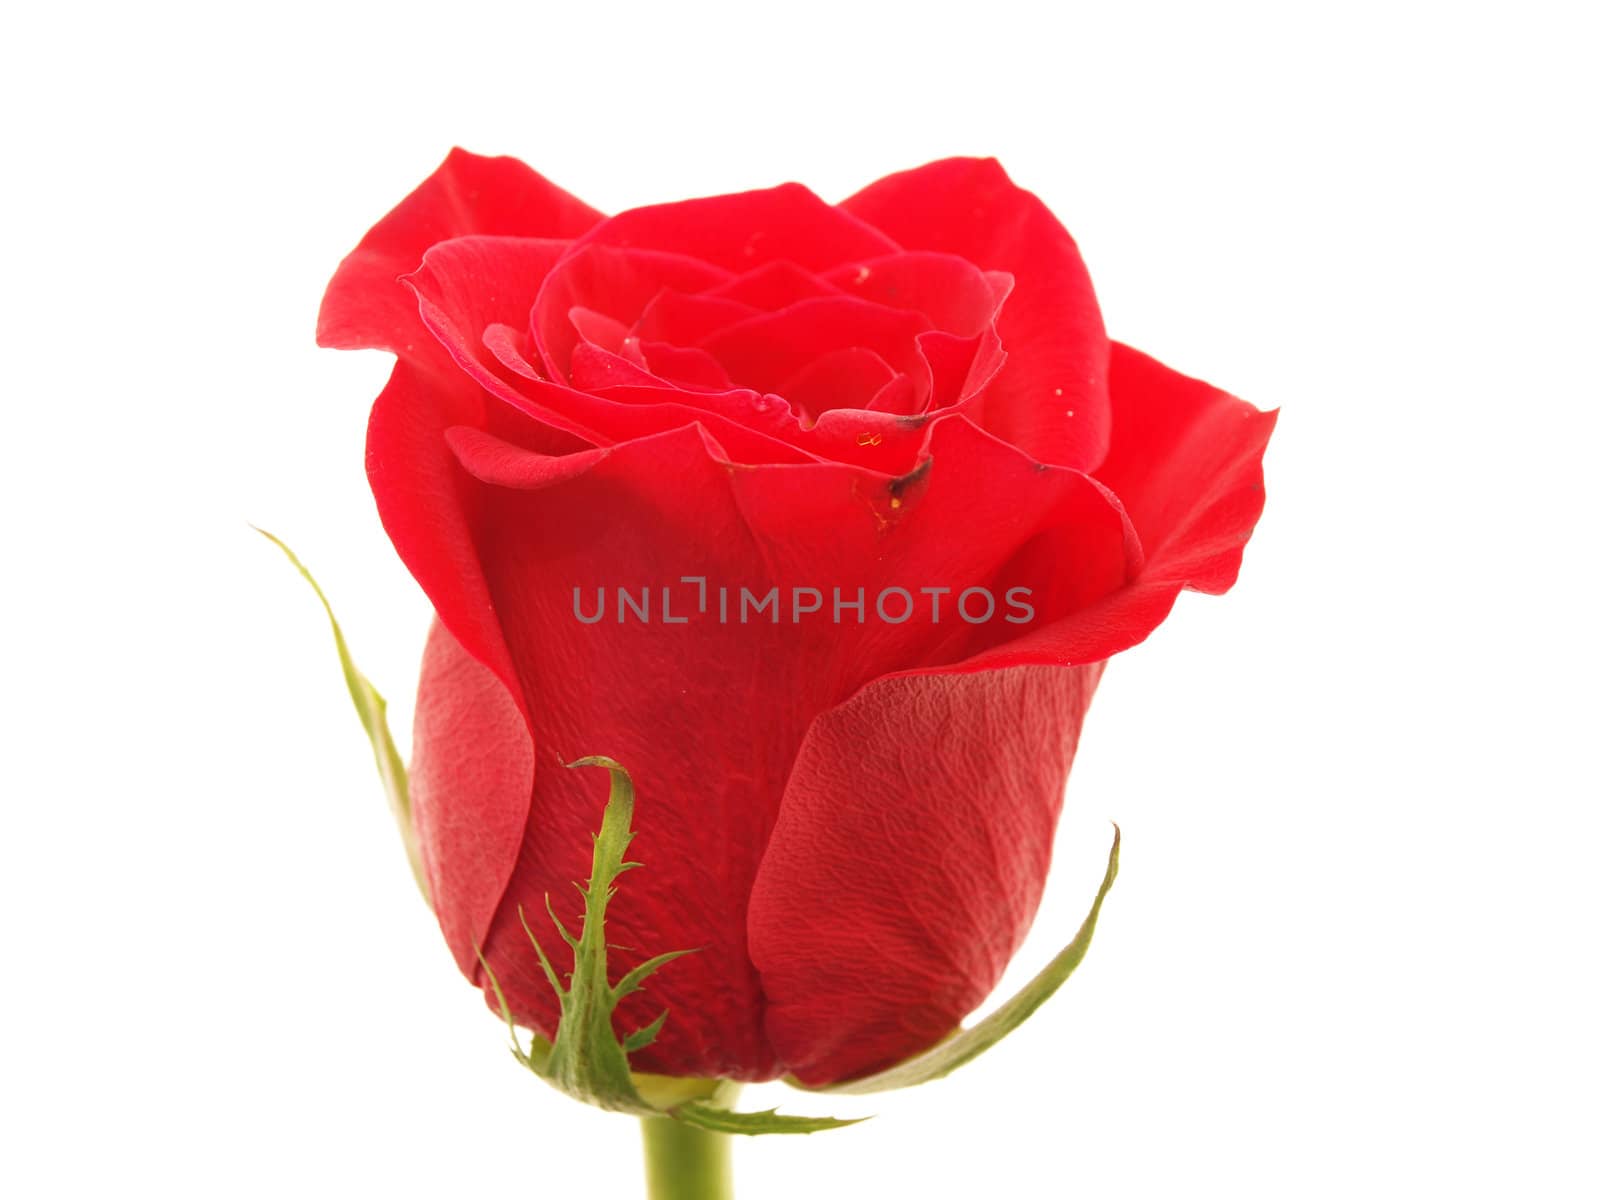 Rose on a white background 